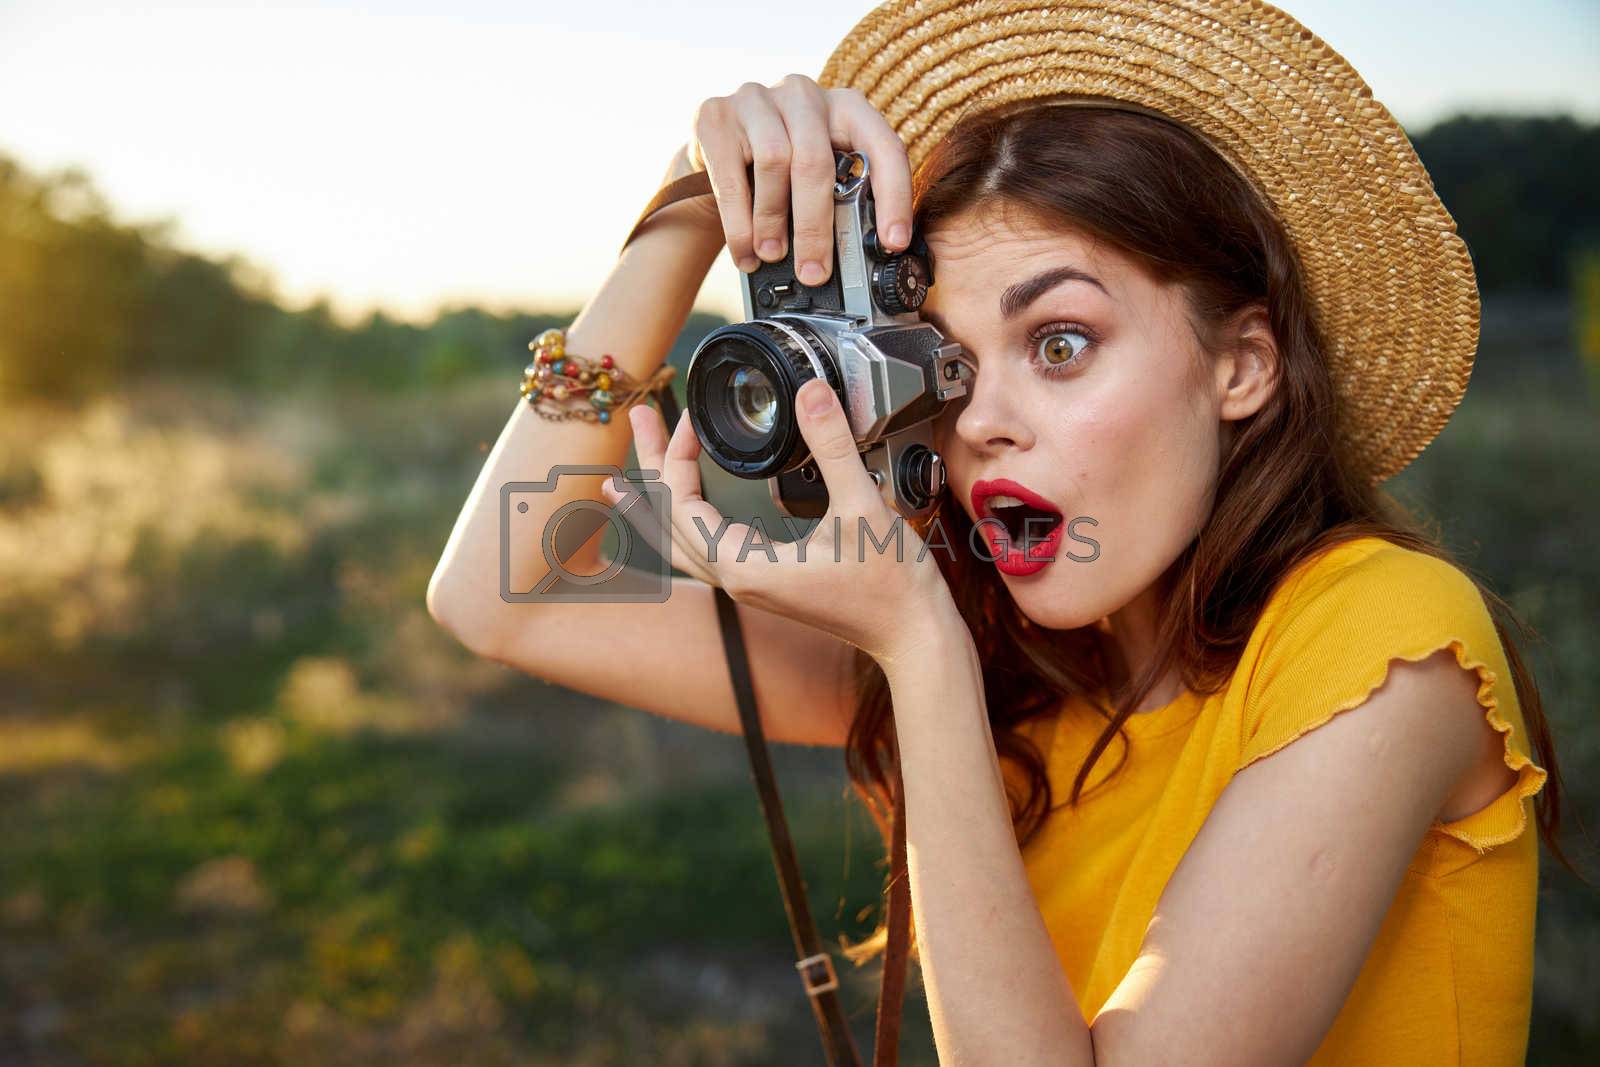 Royalty free image of surprised woman taking nature snapshot lifestyle hobby by SHOTPRIME